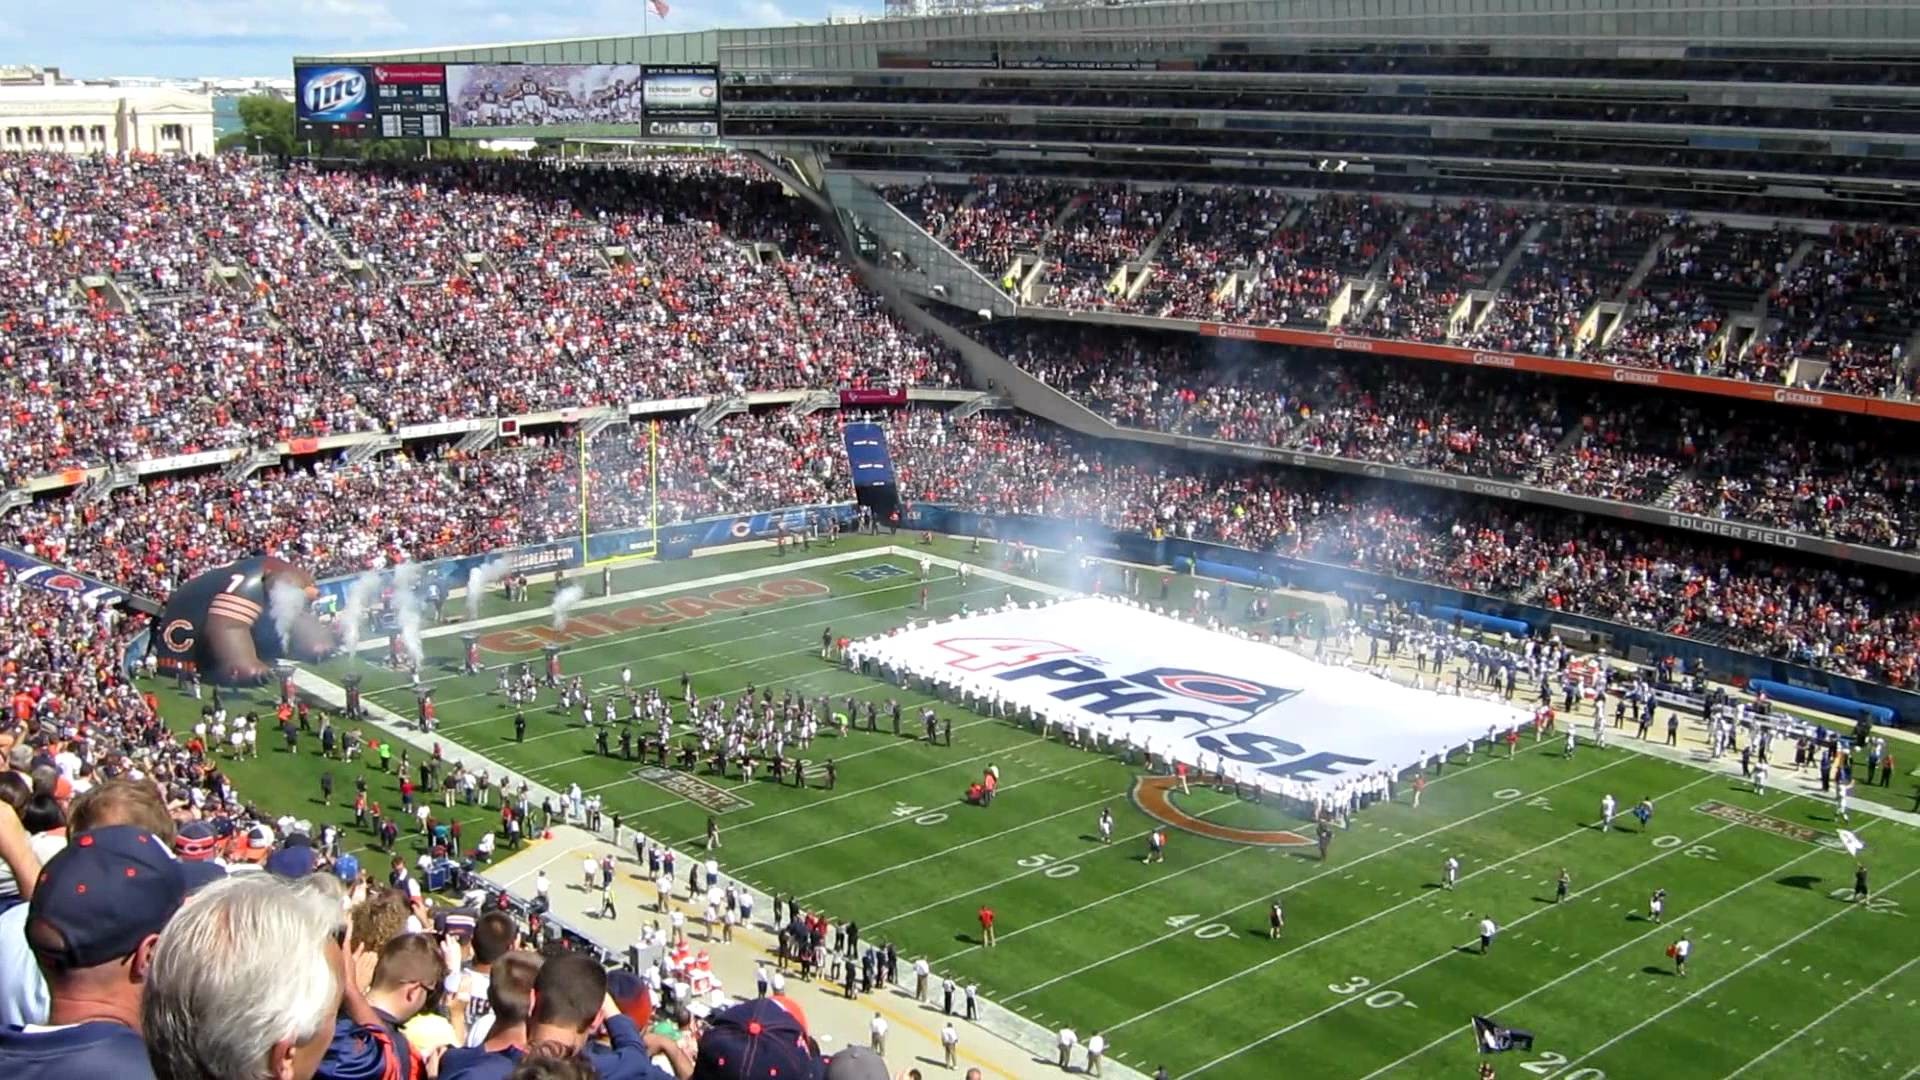 1920x1080 Awesome Flyover at Soldier Field for Chicago Bears Home Opener 2012 versus  Colts - YouTube